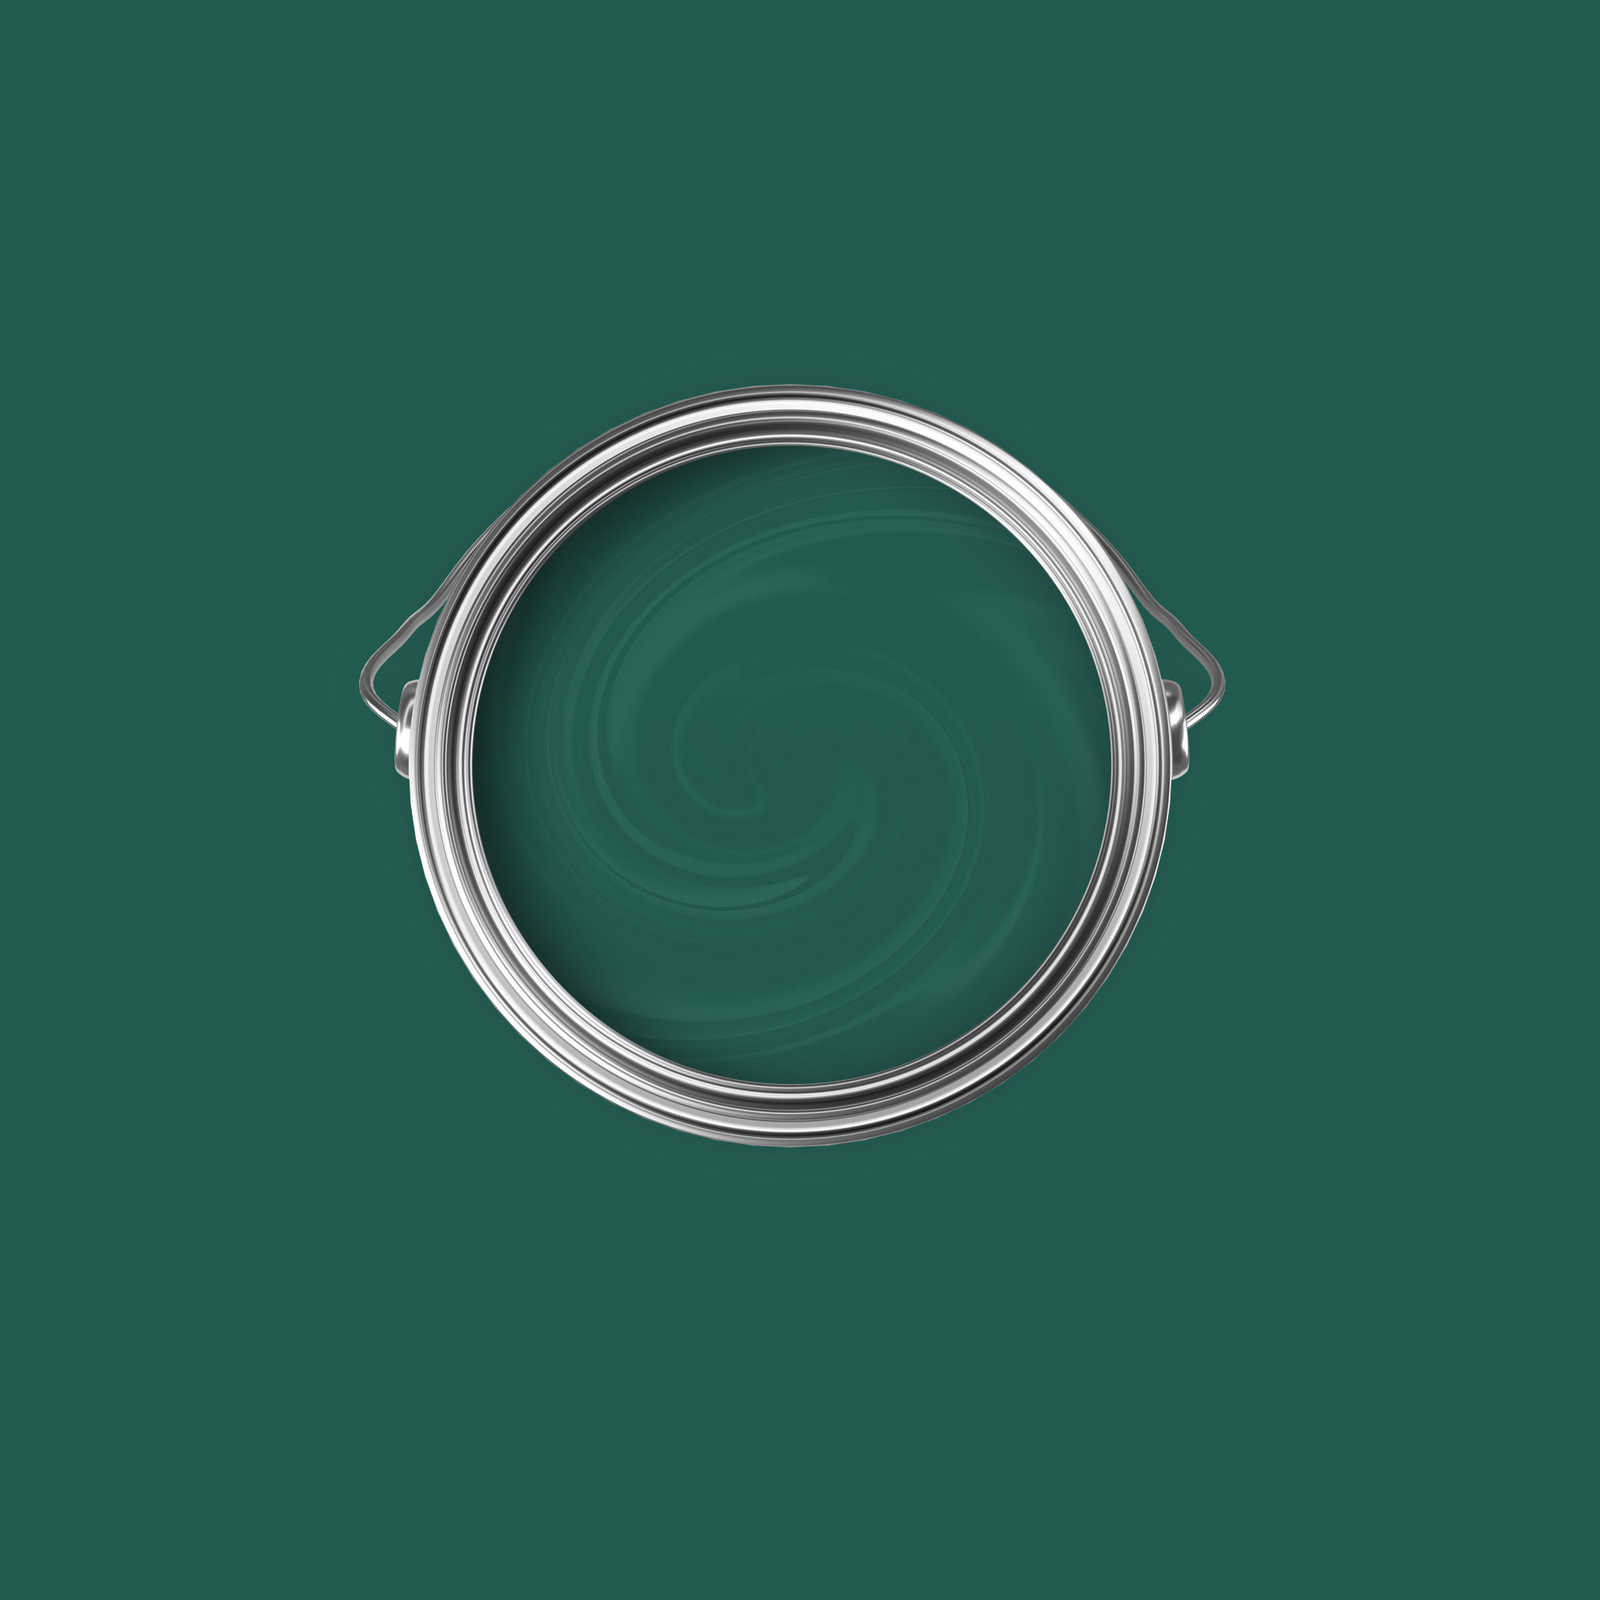             Premium Wall Paint gorgeous emerald green »Expressive Emerald« NW412 – 2,5 litre
        